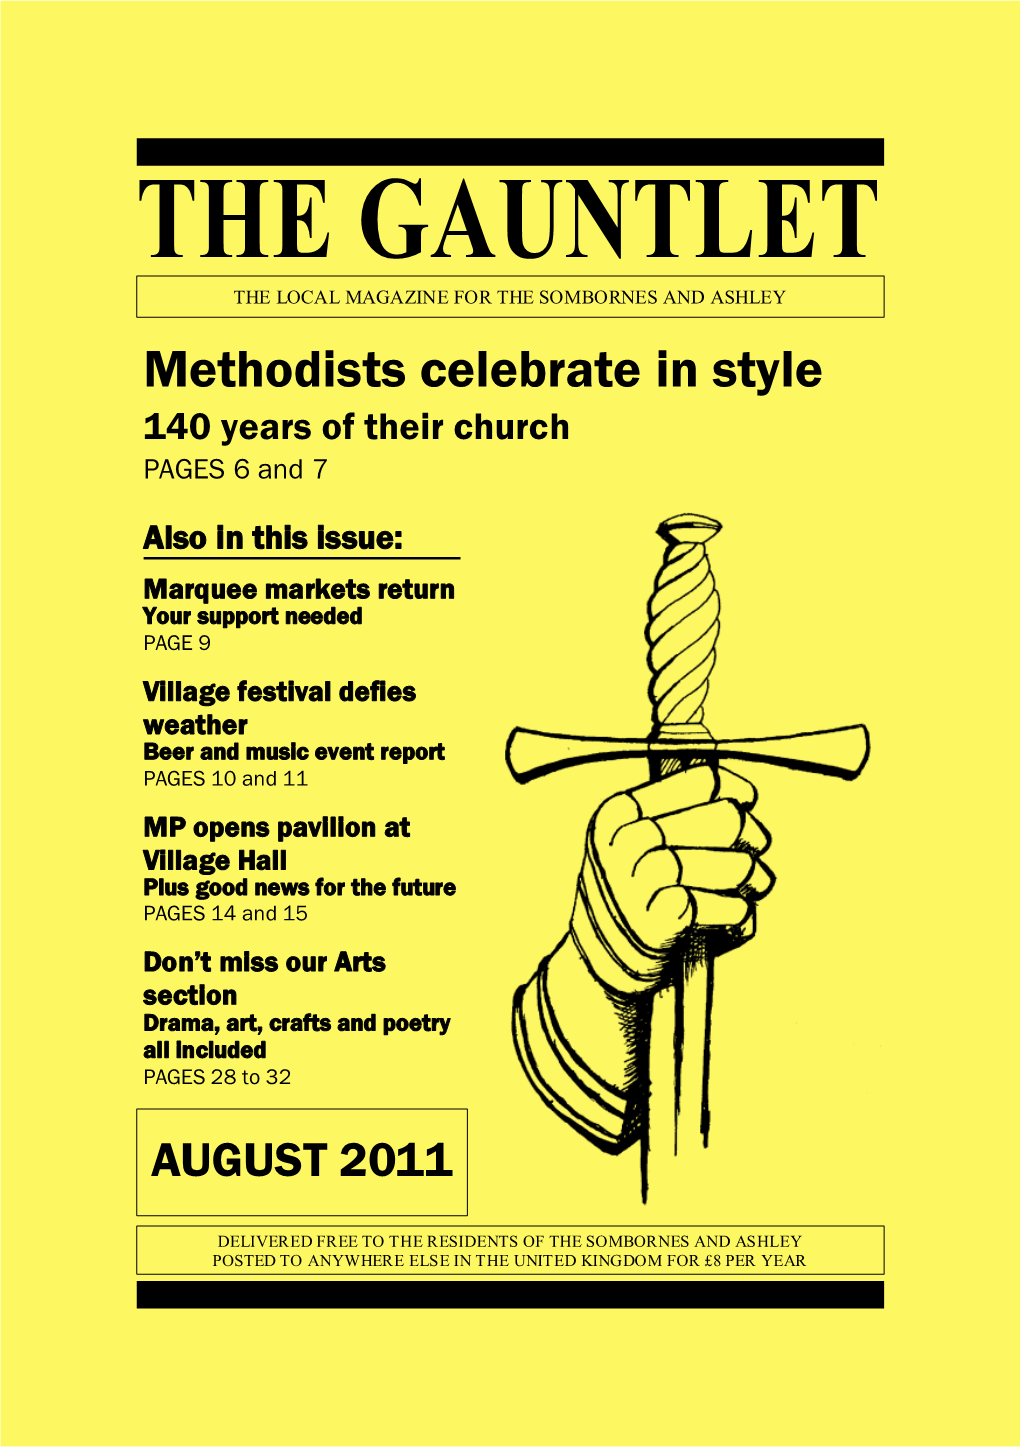 THE GAUNTLET the LOCAL MAGAZINE for the SOMBORNES and ASHLEY Methodists Celebrate in Style 140 Years of Their Church PAGES 6 and 7